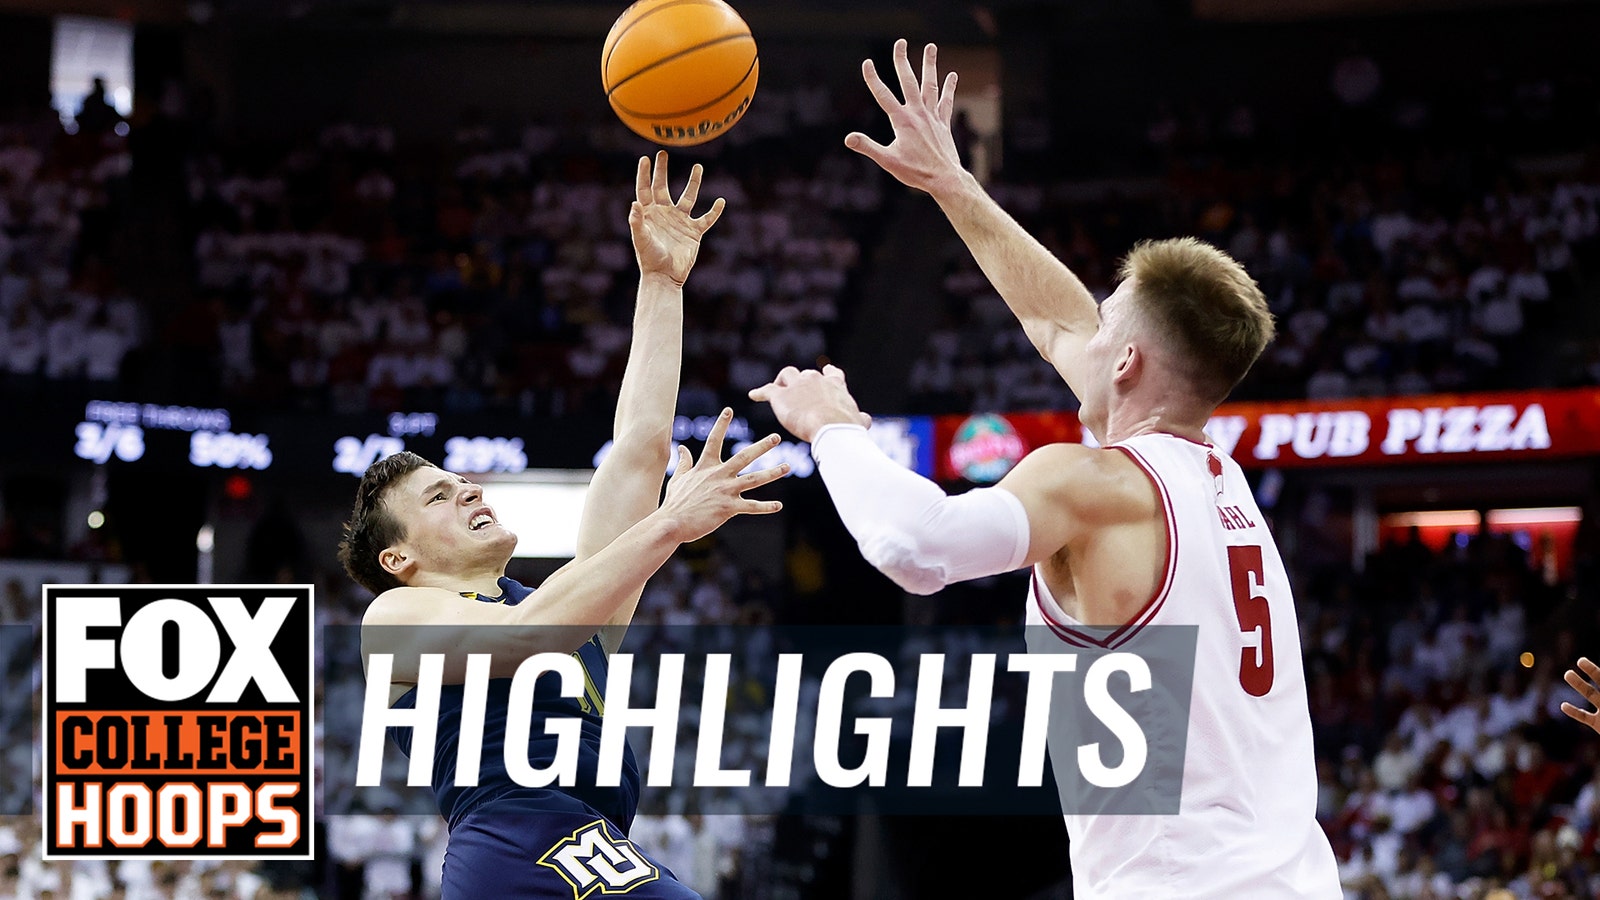 No. 3 Marquette Golden Eagles vs. Wisconsin Badgers Highlights